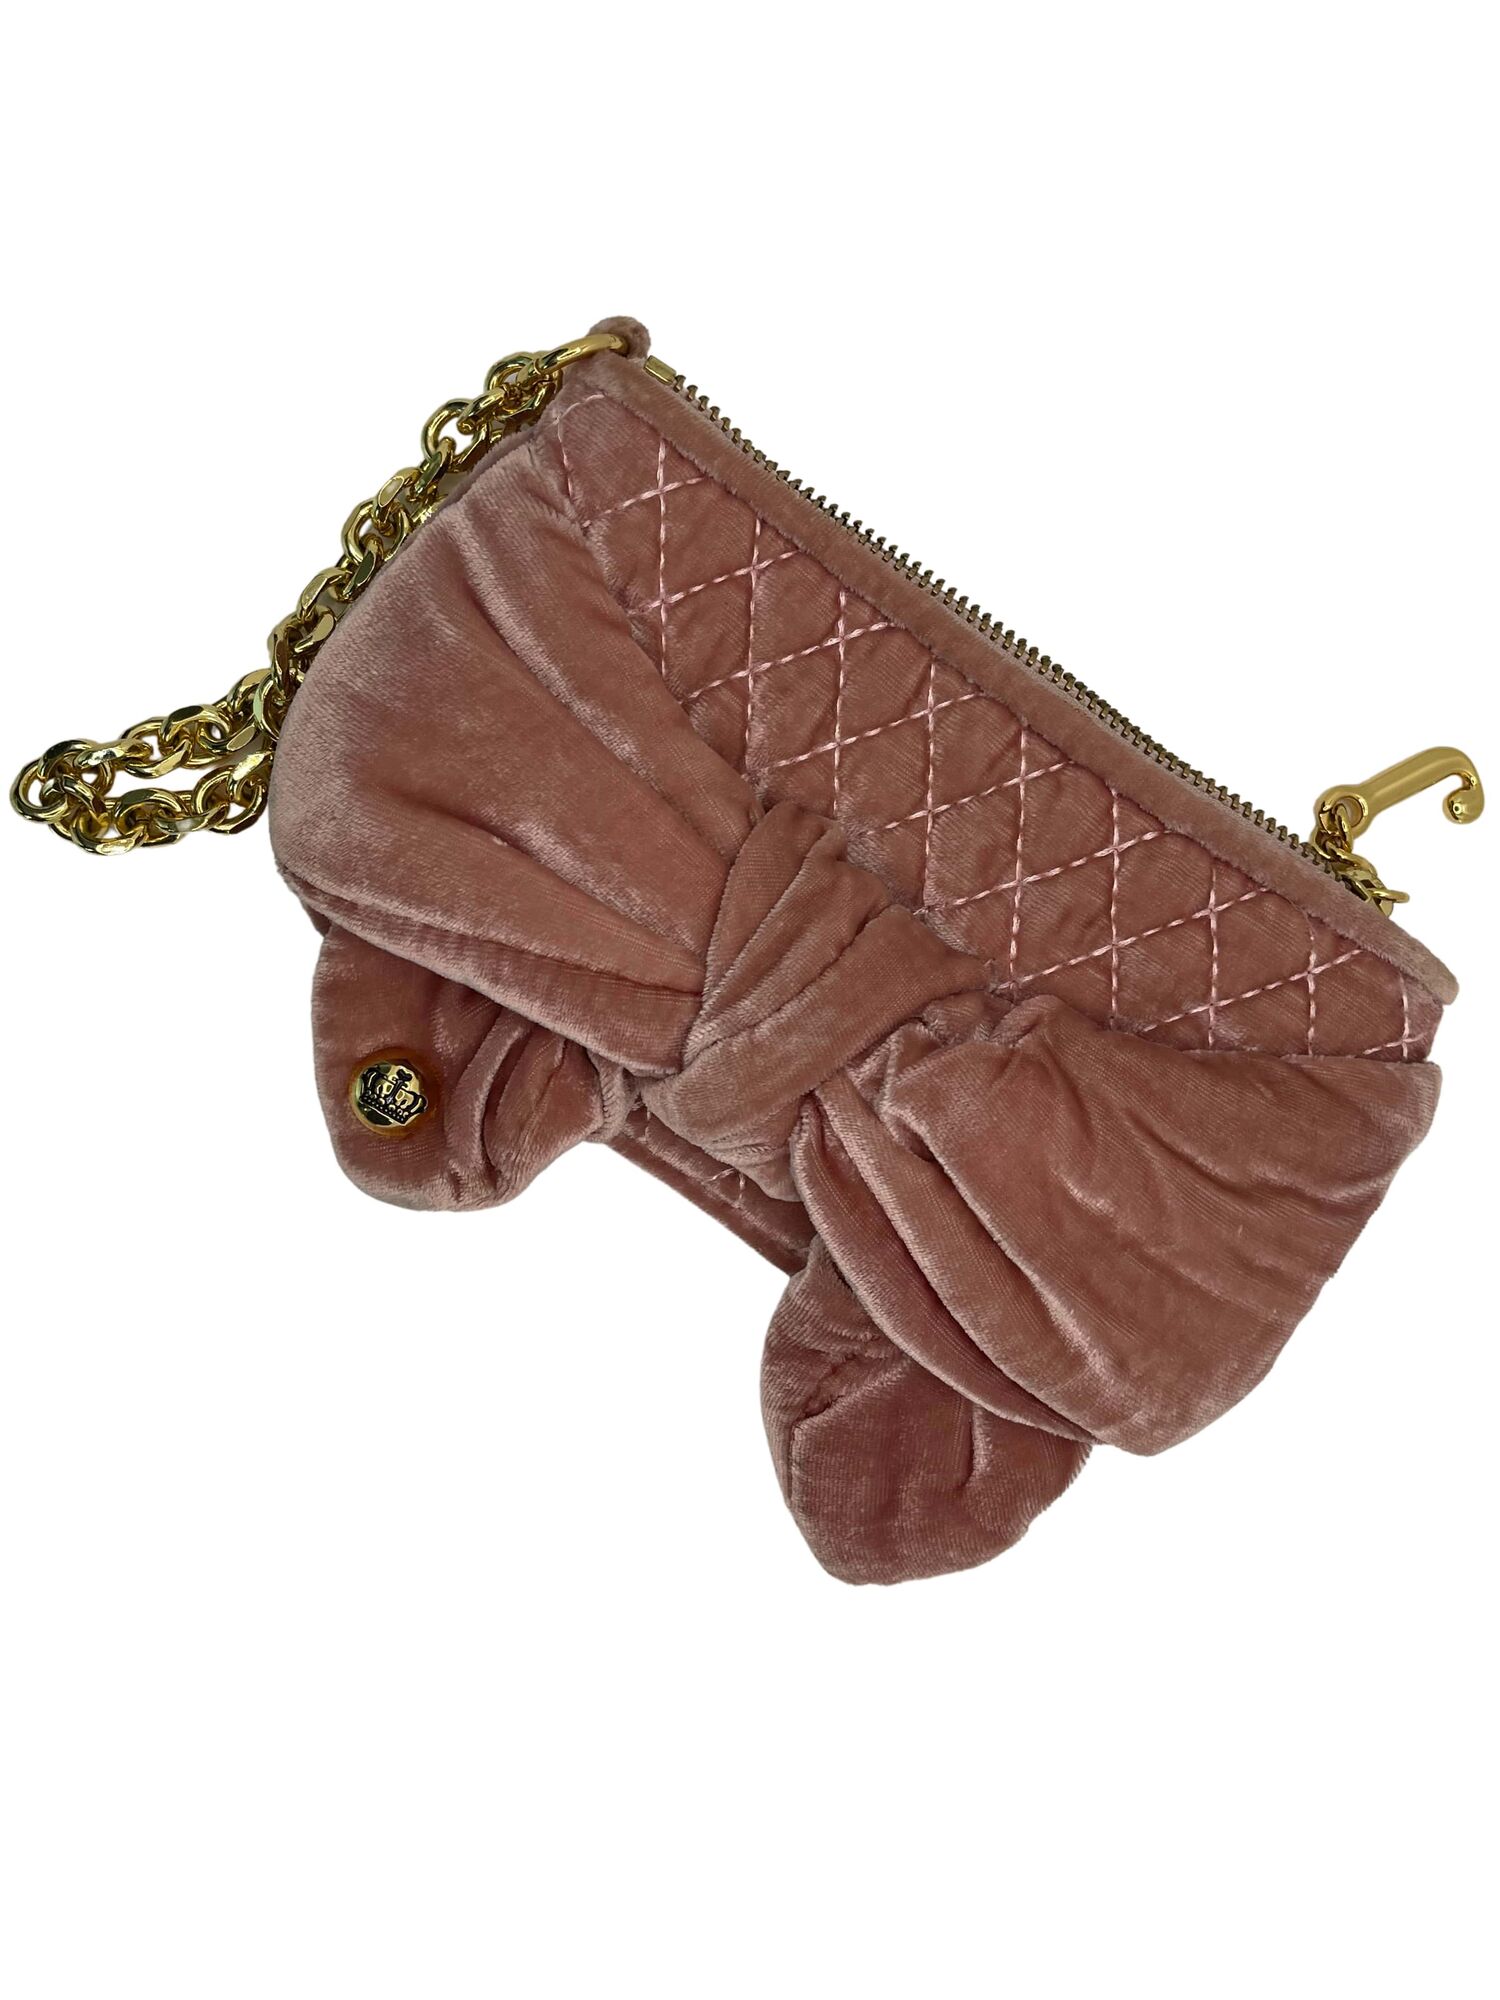 Can someone help me find replica Juicy Couture bags/purses i have seen some  old listings on dhgate but they been removed : r/DHgateRepSquad